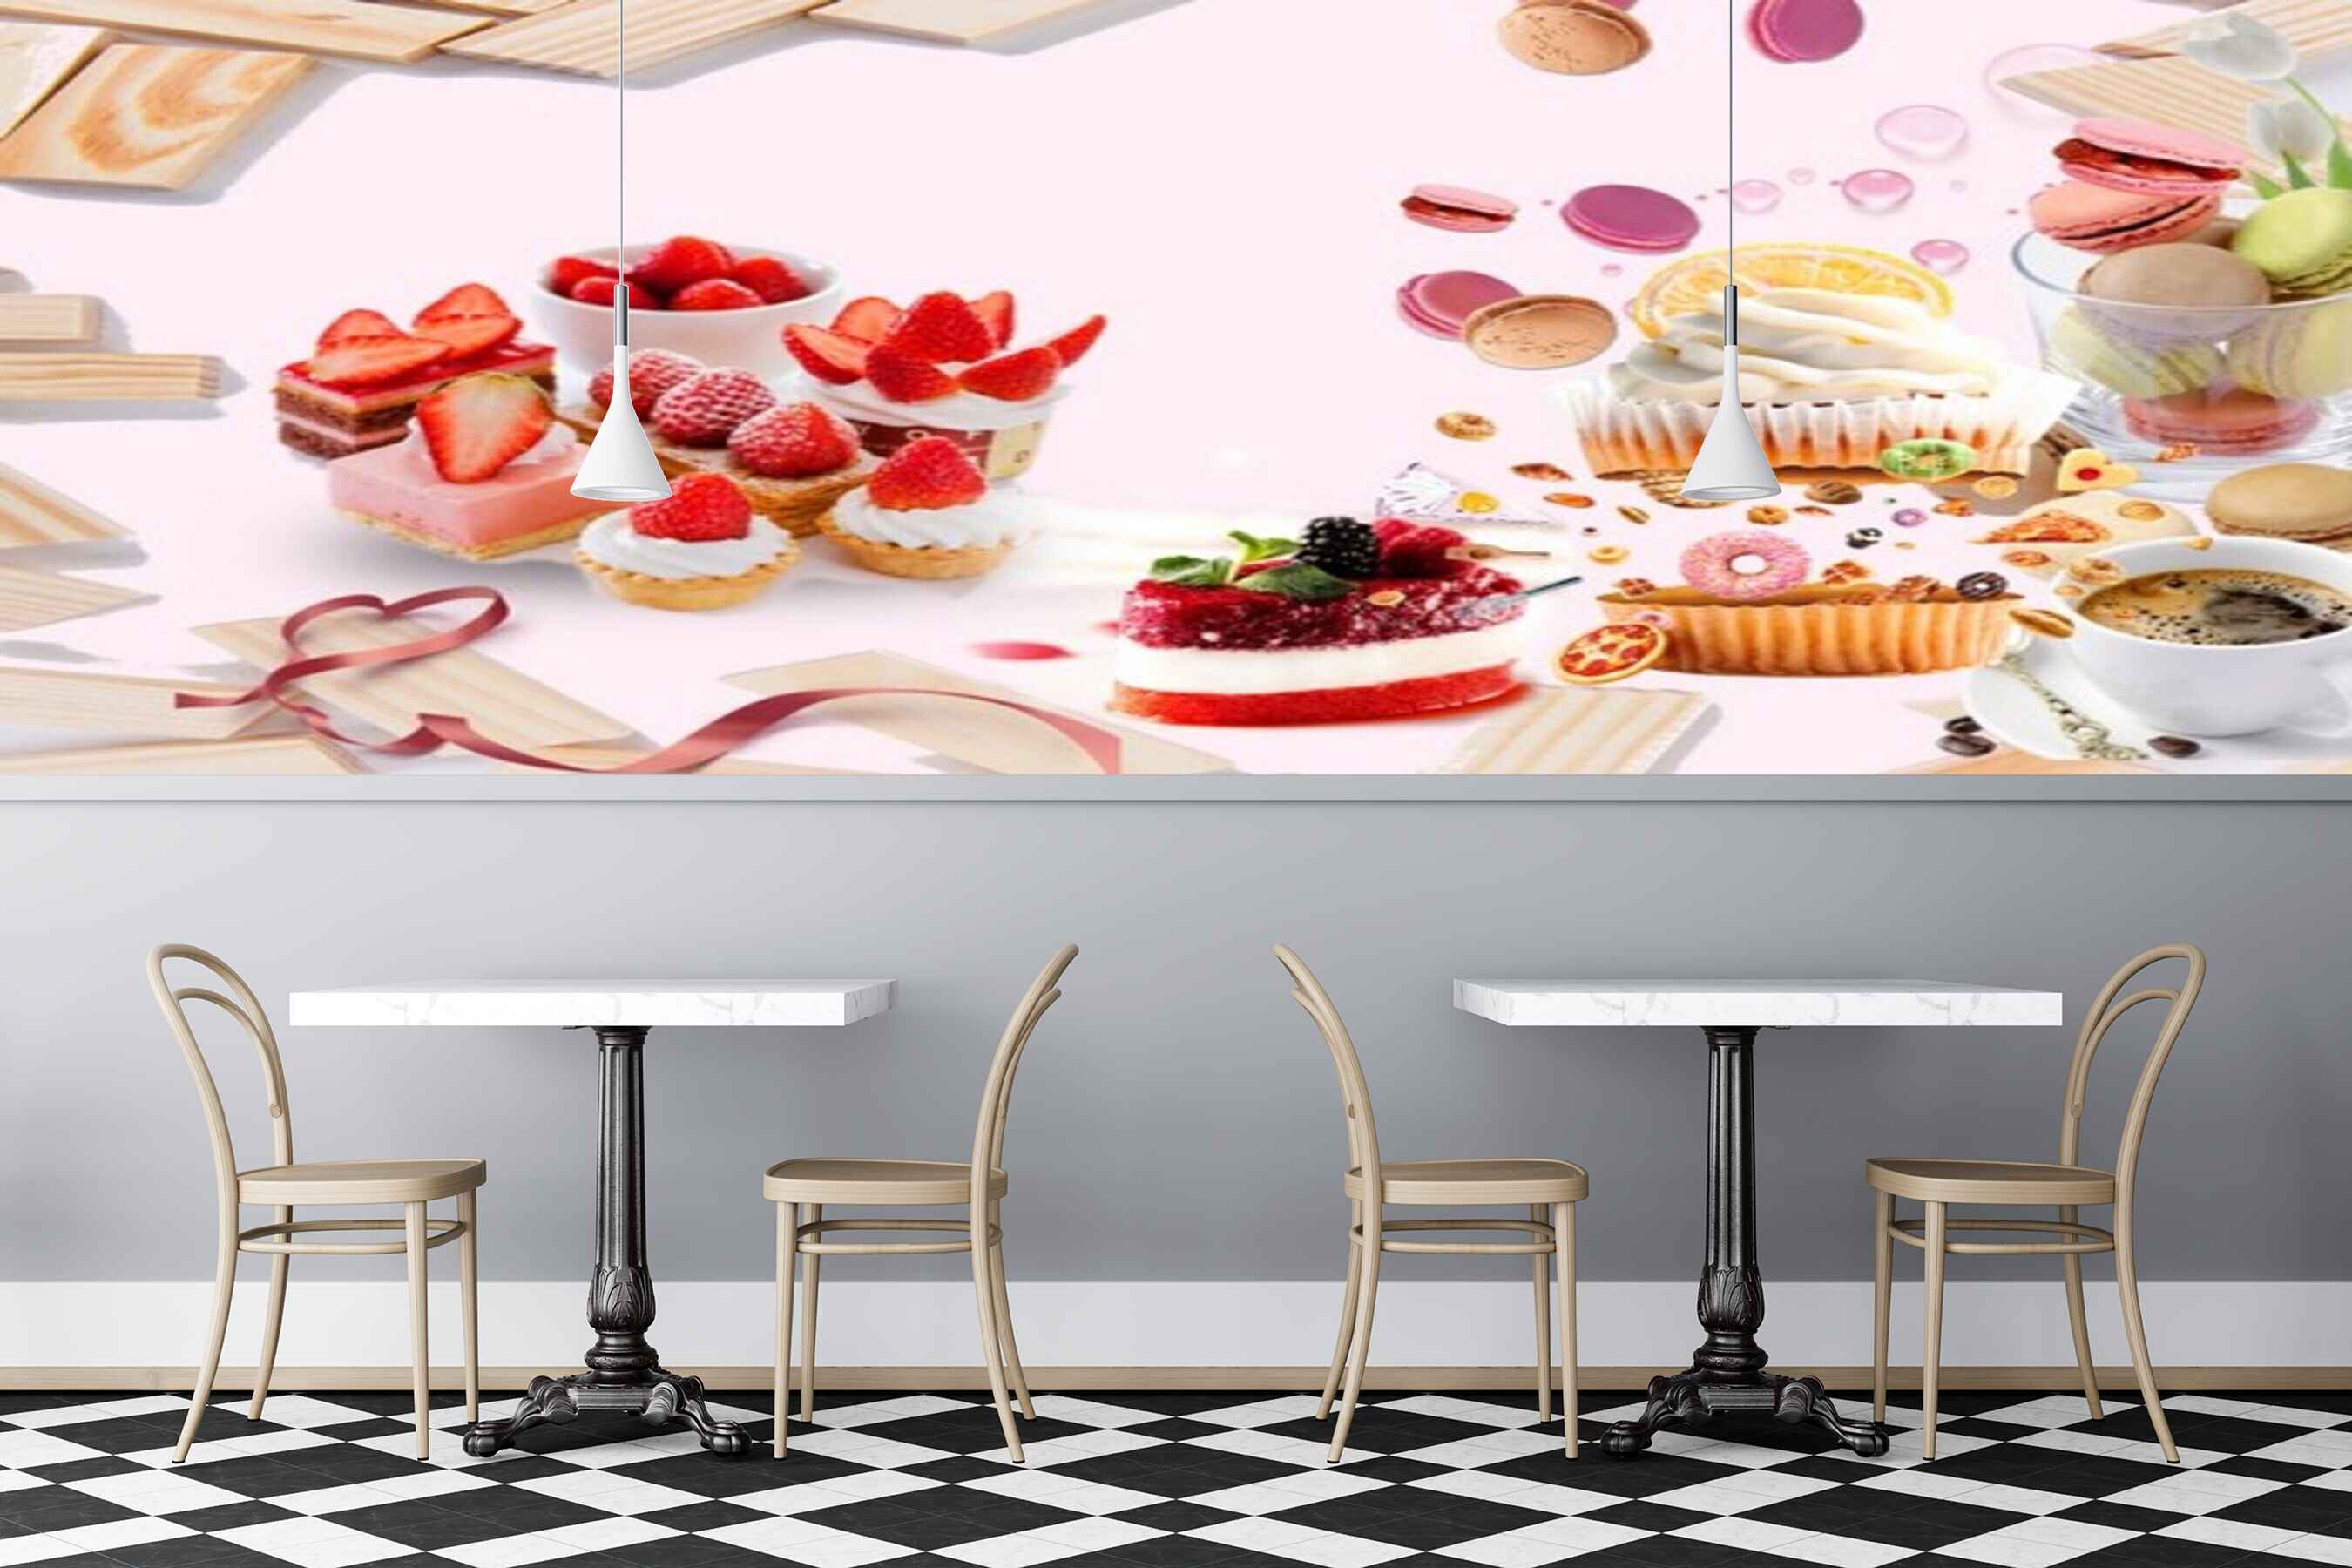 Avikalp MWZ3123 Cup Cakes Fruits Cookies Coffee HD Wallpaper for Cafe Restaurant